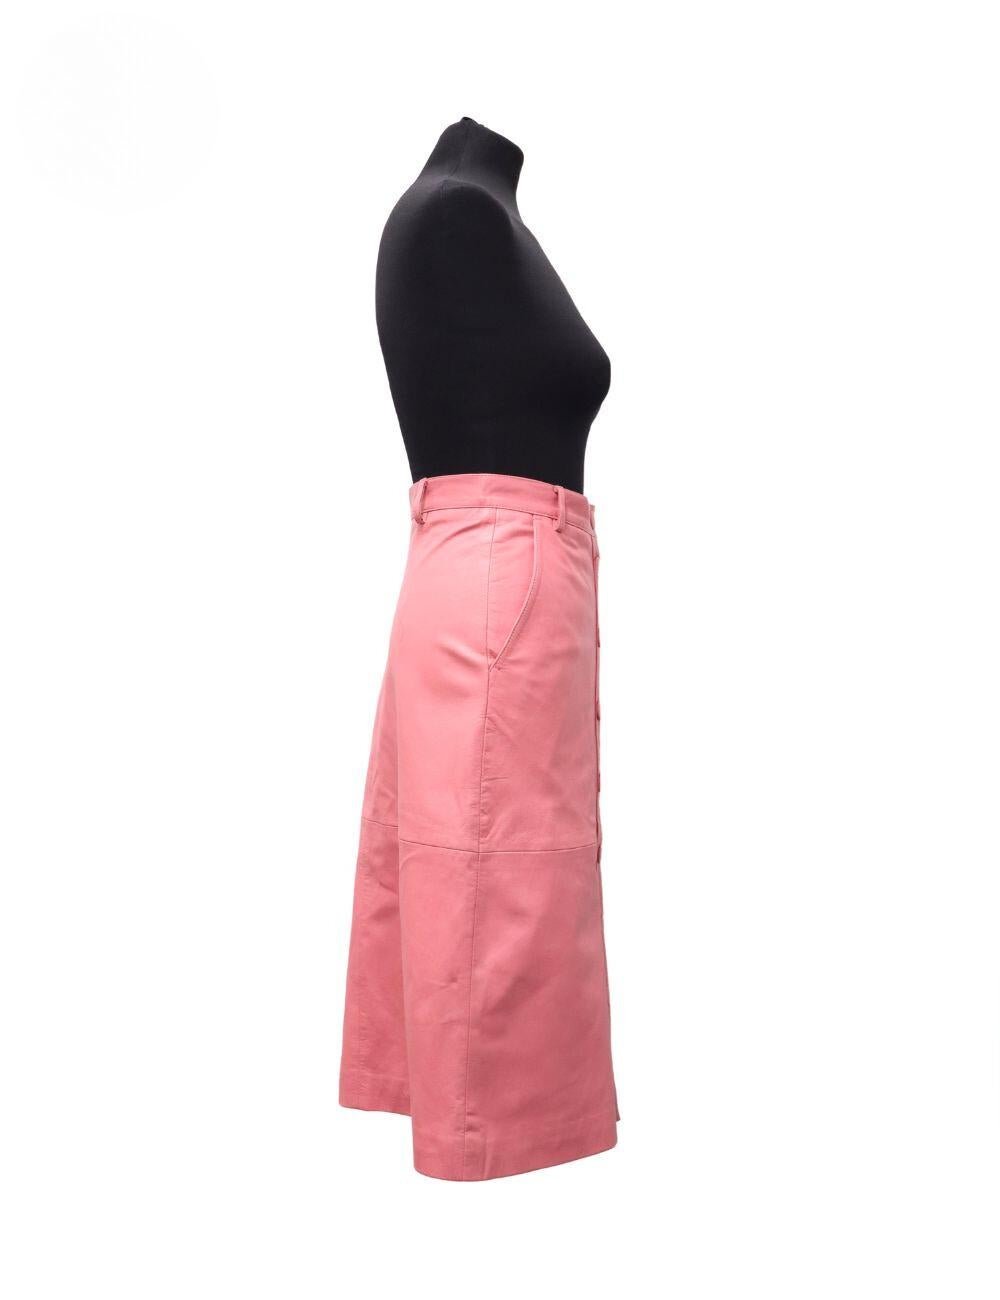 Remain Birger Christensen Bellis Leather A-Line Skirt Size EU 34 In Excellent Condition For Sale In Amman, JO